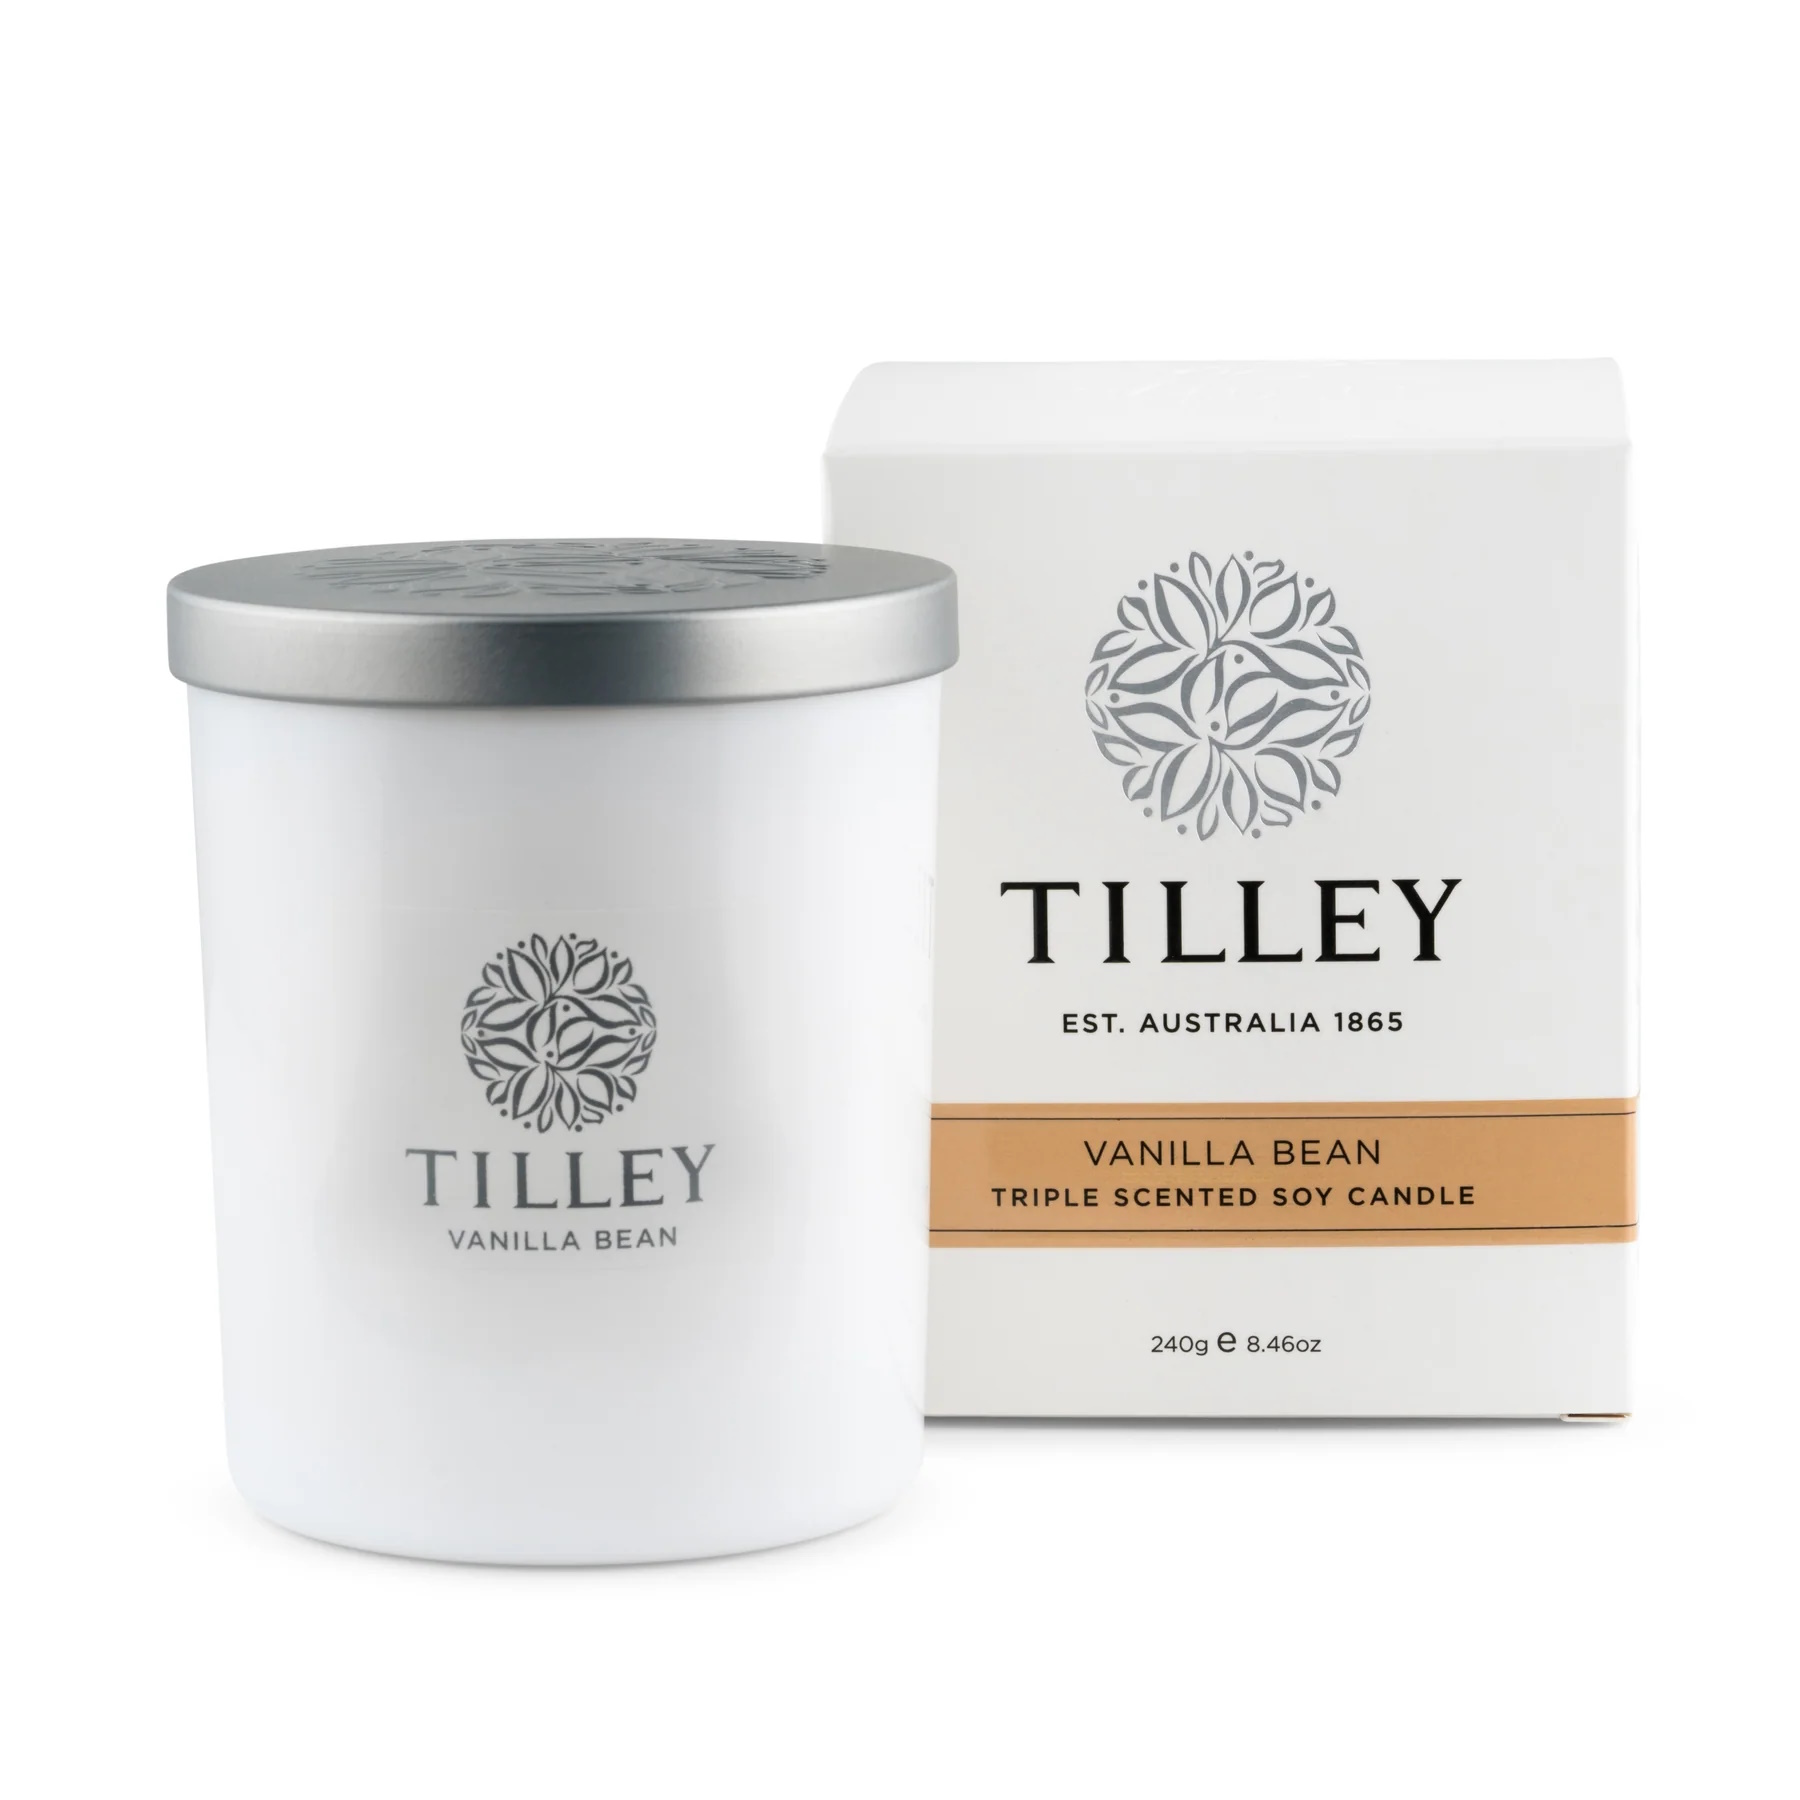 Tilley Classic White Soy Wax Candle 240g Vanilla Bean